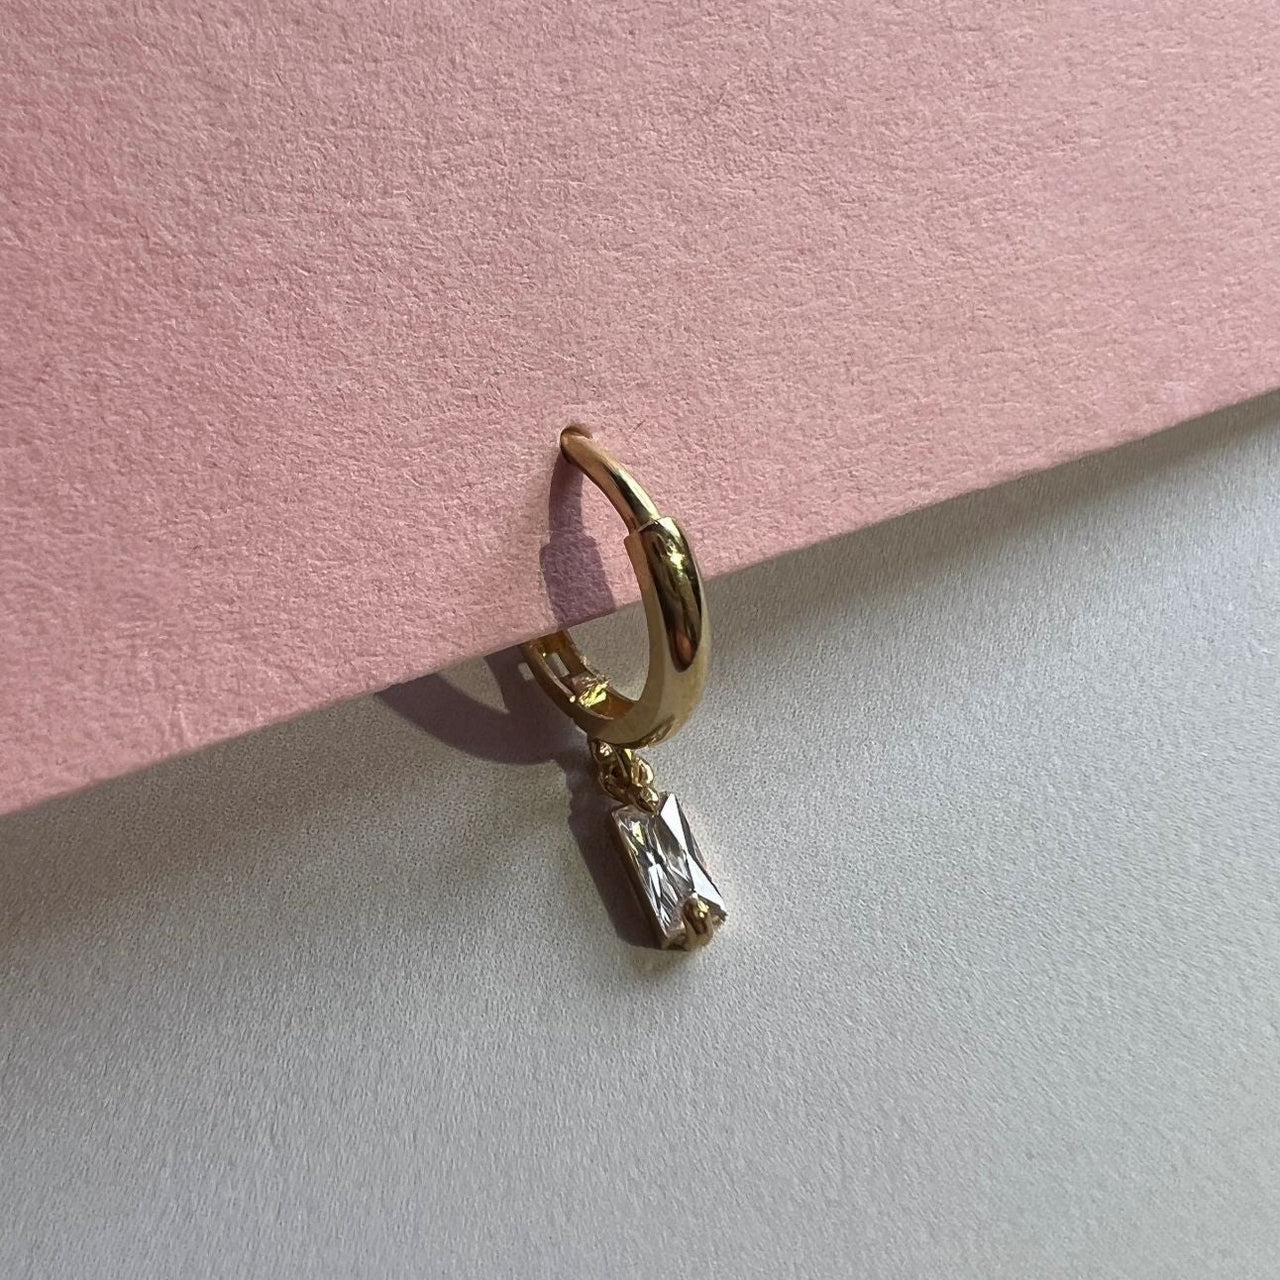 EARRING "SIMPLE THING" WITH WHITE CZ / SOLID GOLD